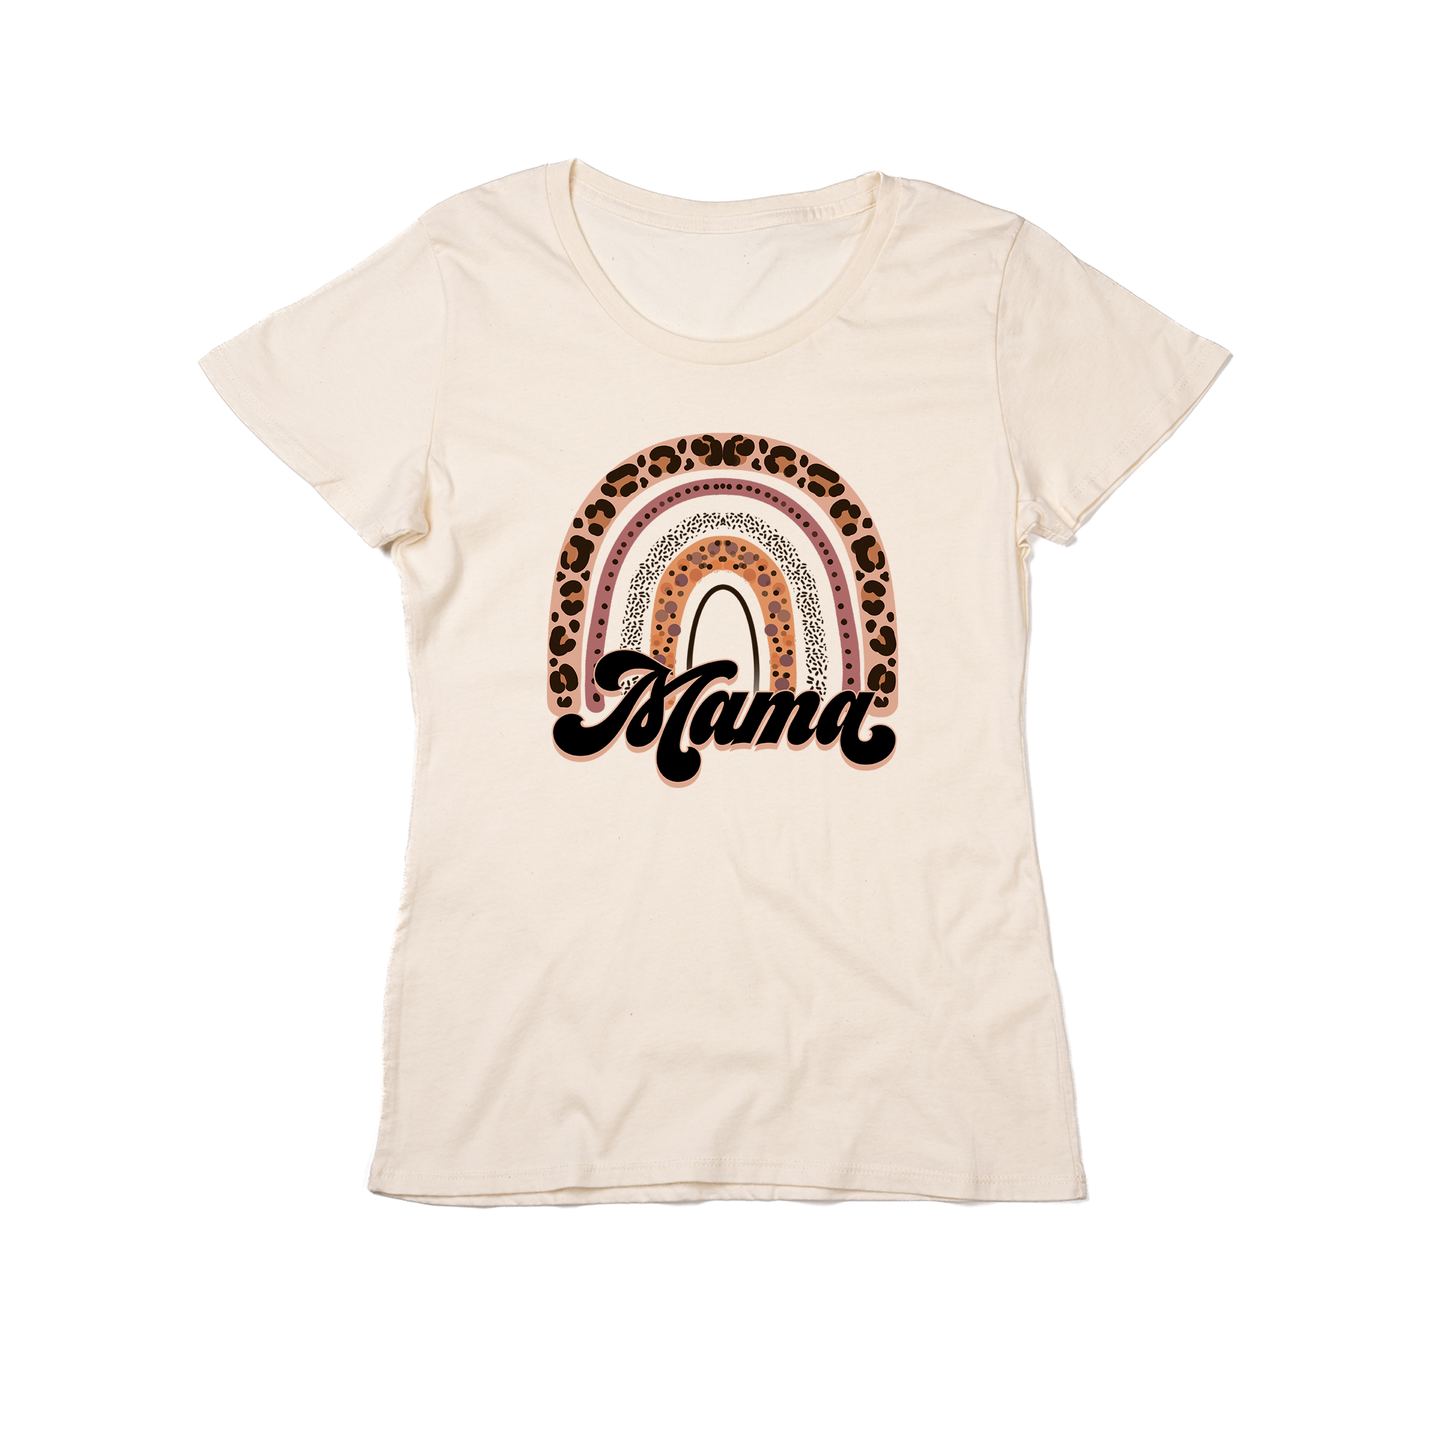 Mama (Cheetah Rainbow, Across Front) - Women's Fitted Tee (Natural)